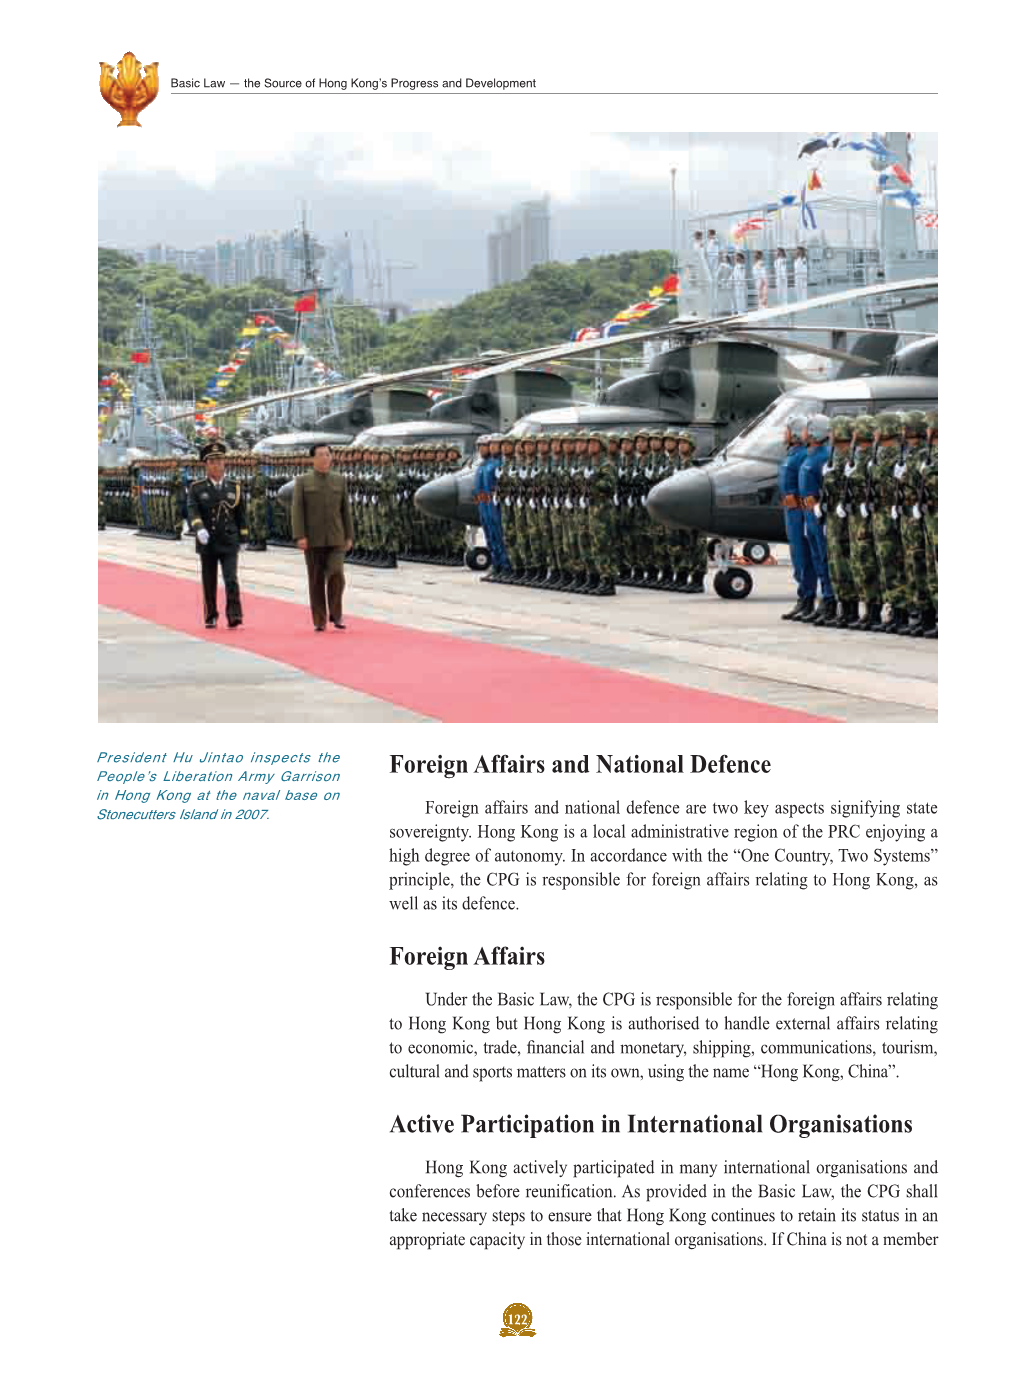 Foreign Affairs and National Defence